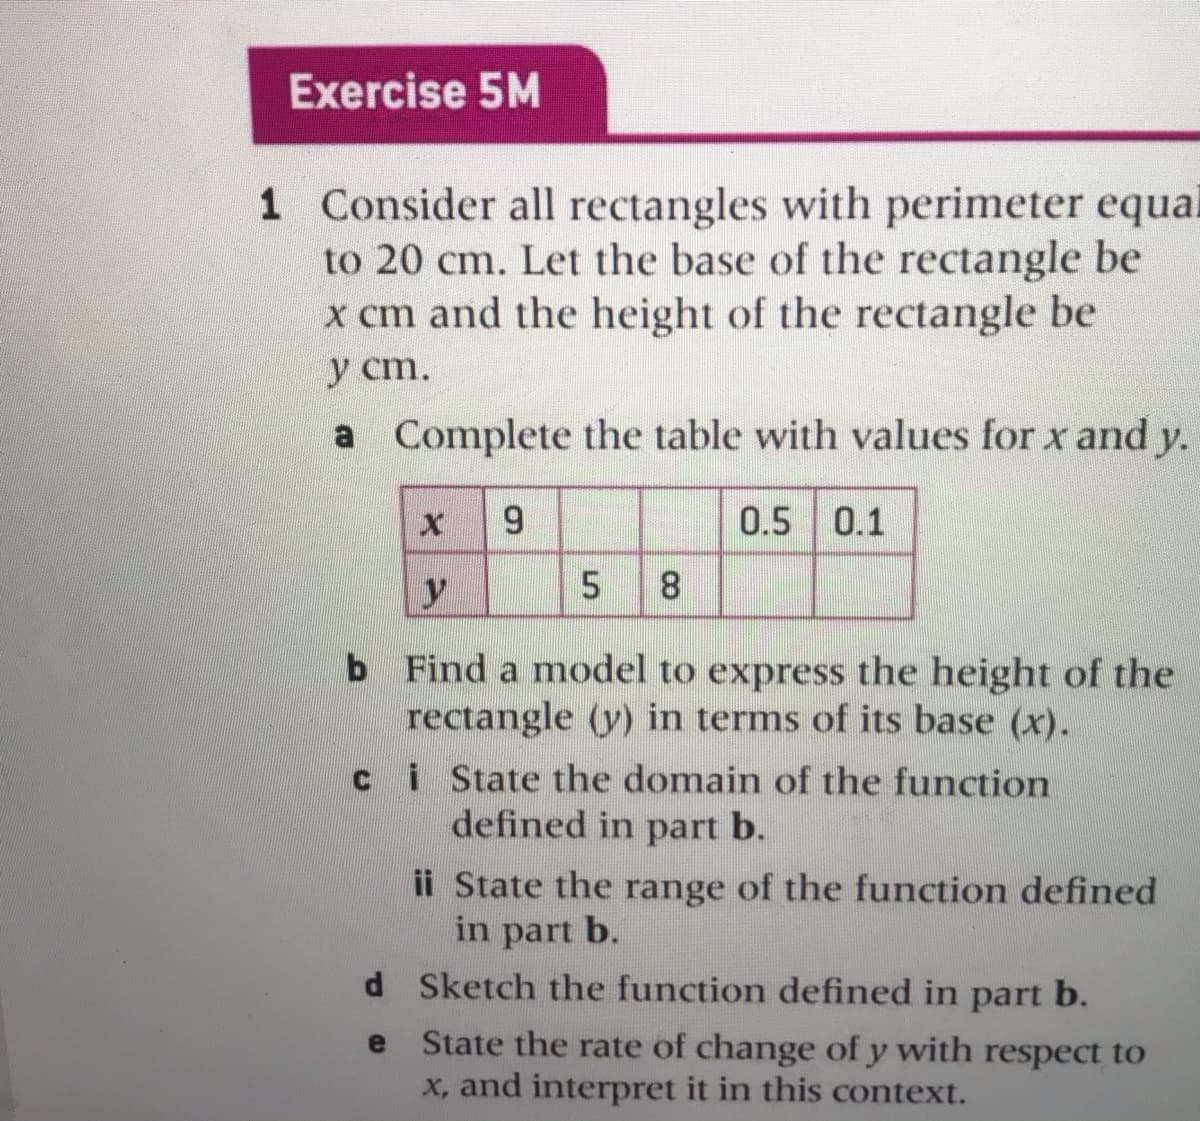 Exercise 5M
1 Consider all rectangles with perimeter equal
to 20 cm. Let the base of the rectangle be
x cm and the height of the rectangle be
y cm.
a Complete the table with values for x and y.
6.
0.5 0.1
5
b Find a model to express the height of the
rectangle (y) in terms of its base (x).
i State the domain of the function
defined in part b.
ii State the range of the function defined
in part b.
d Sketch the function defined in part b.
State the rate of change of y with respect to
x, and interpret it in this context.
e
